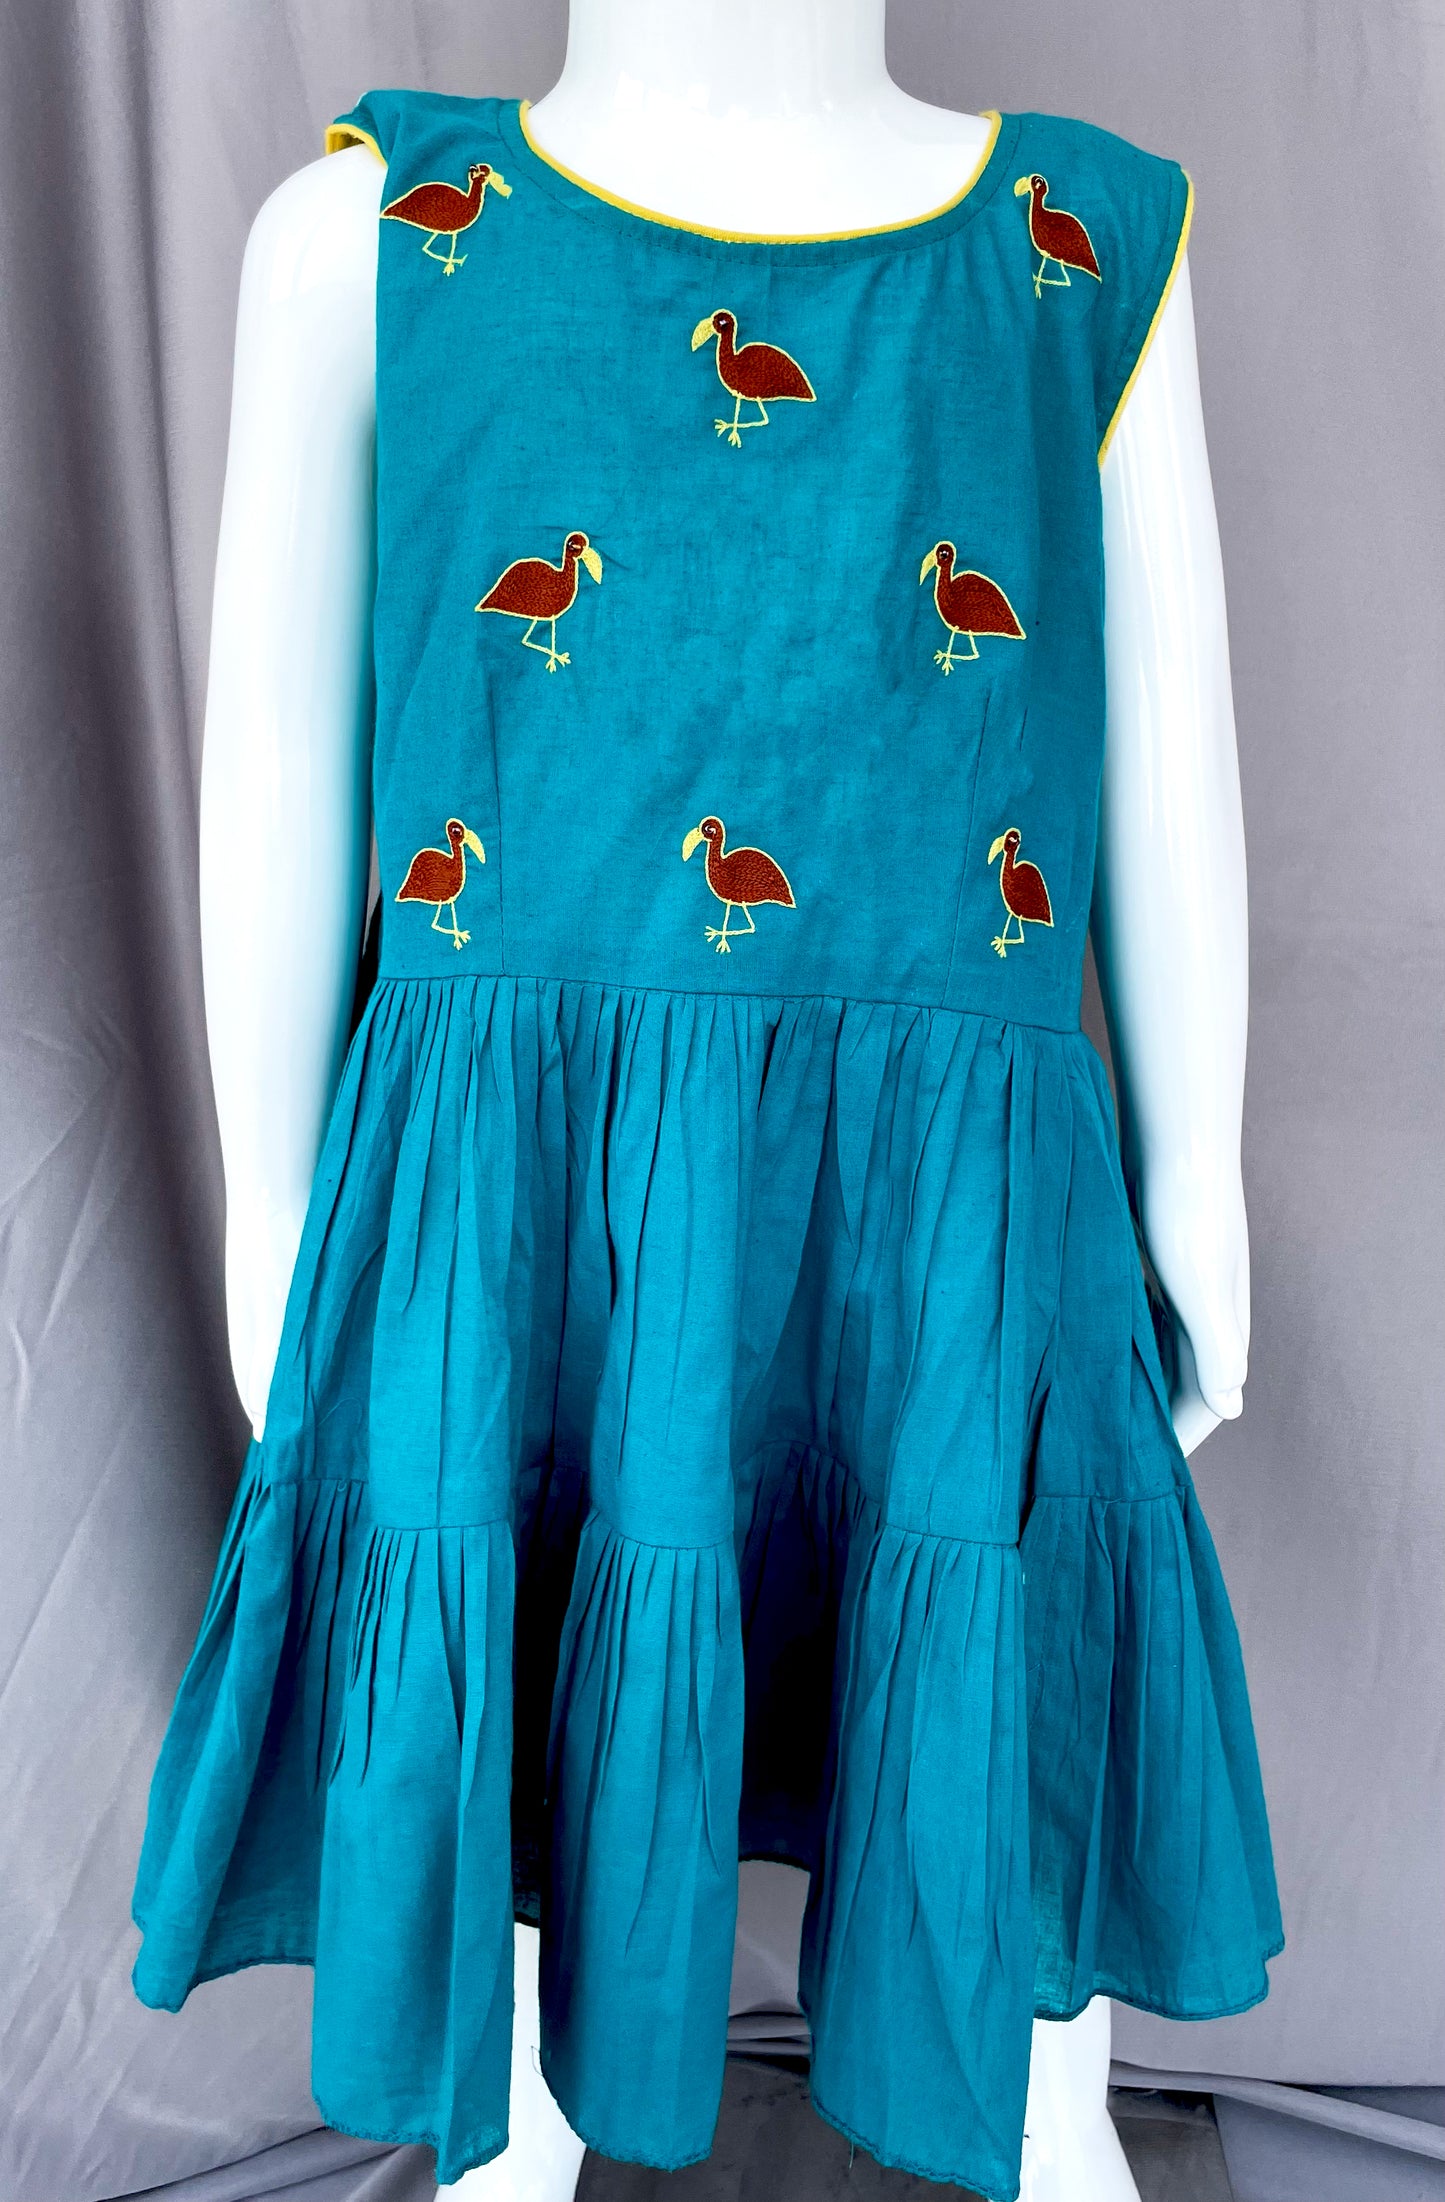 Turquoise Kids Dress, Summer wear for Girls, Frock for Girl Child, Bird Embroidery